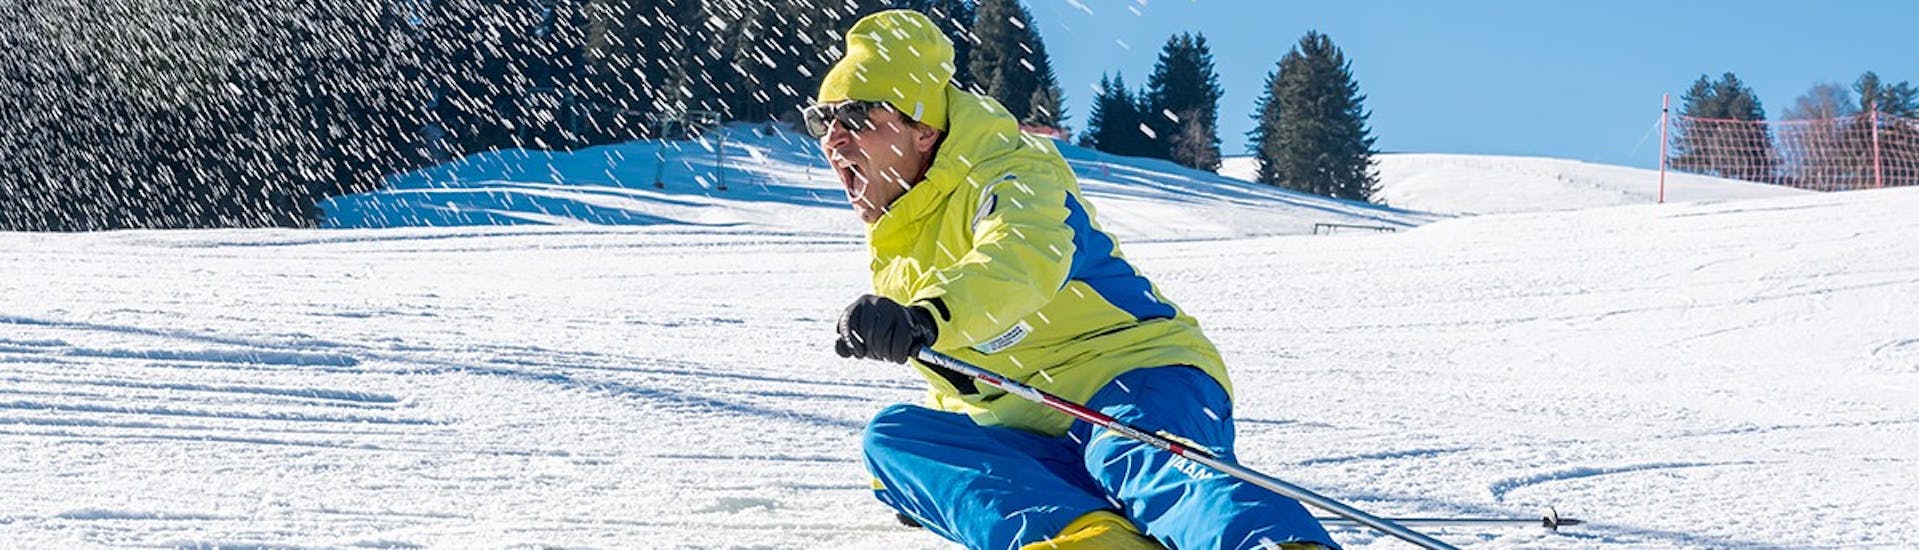 A ski instructor is ready for another of the private ski lessons for adults of all levels in Asiago.